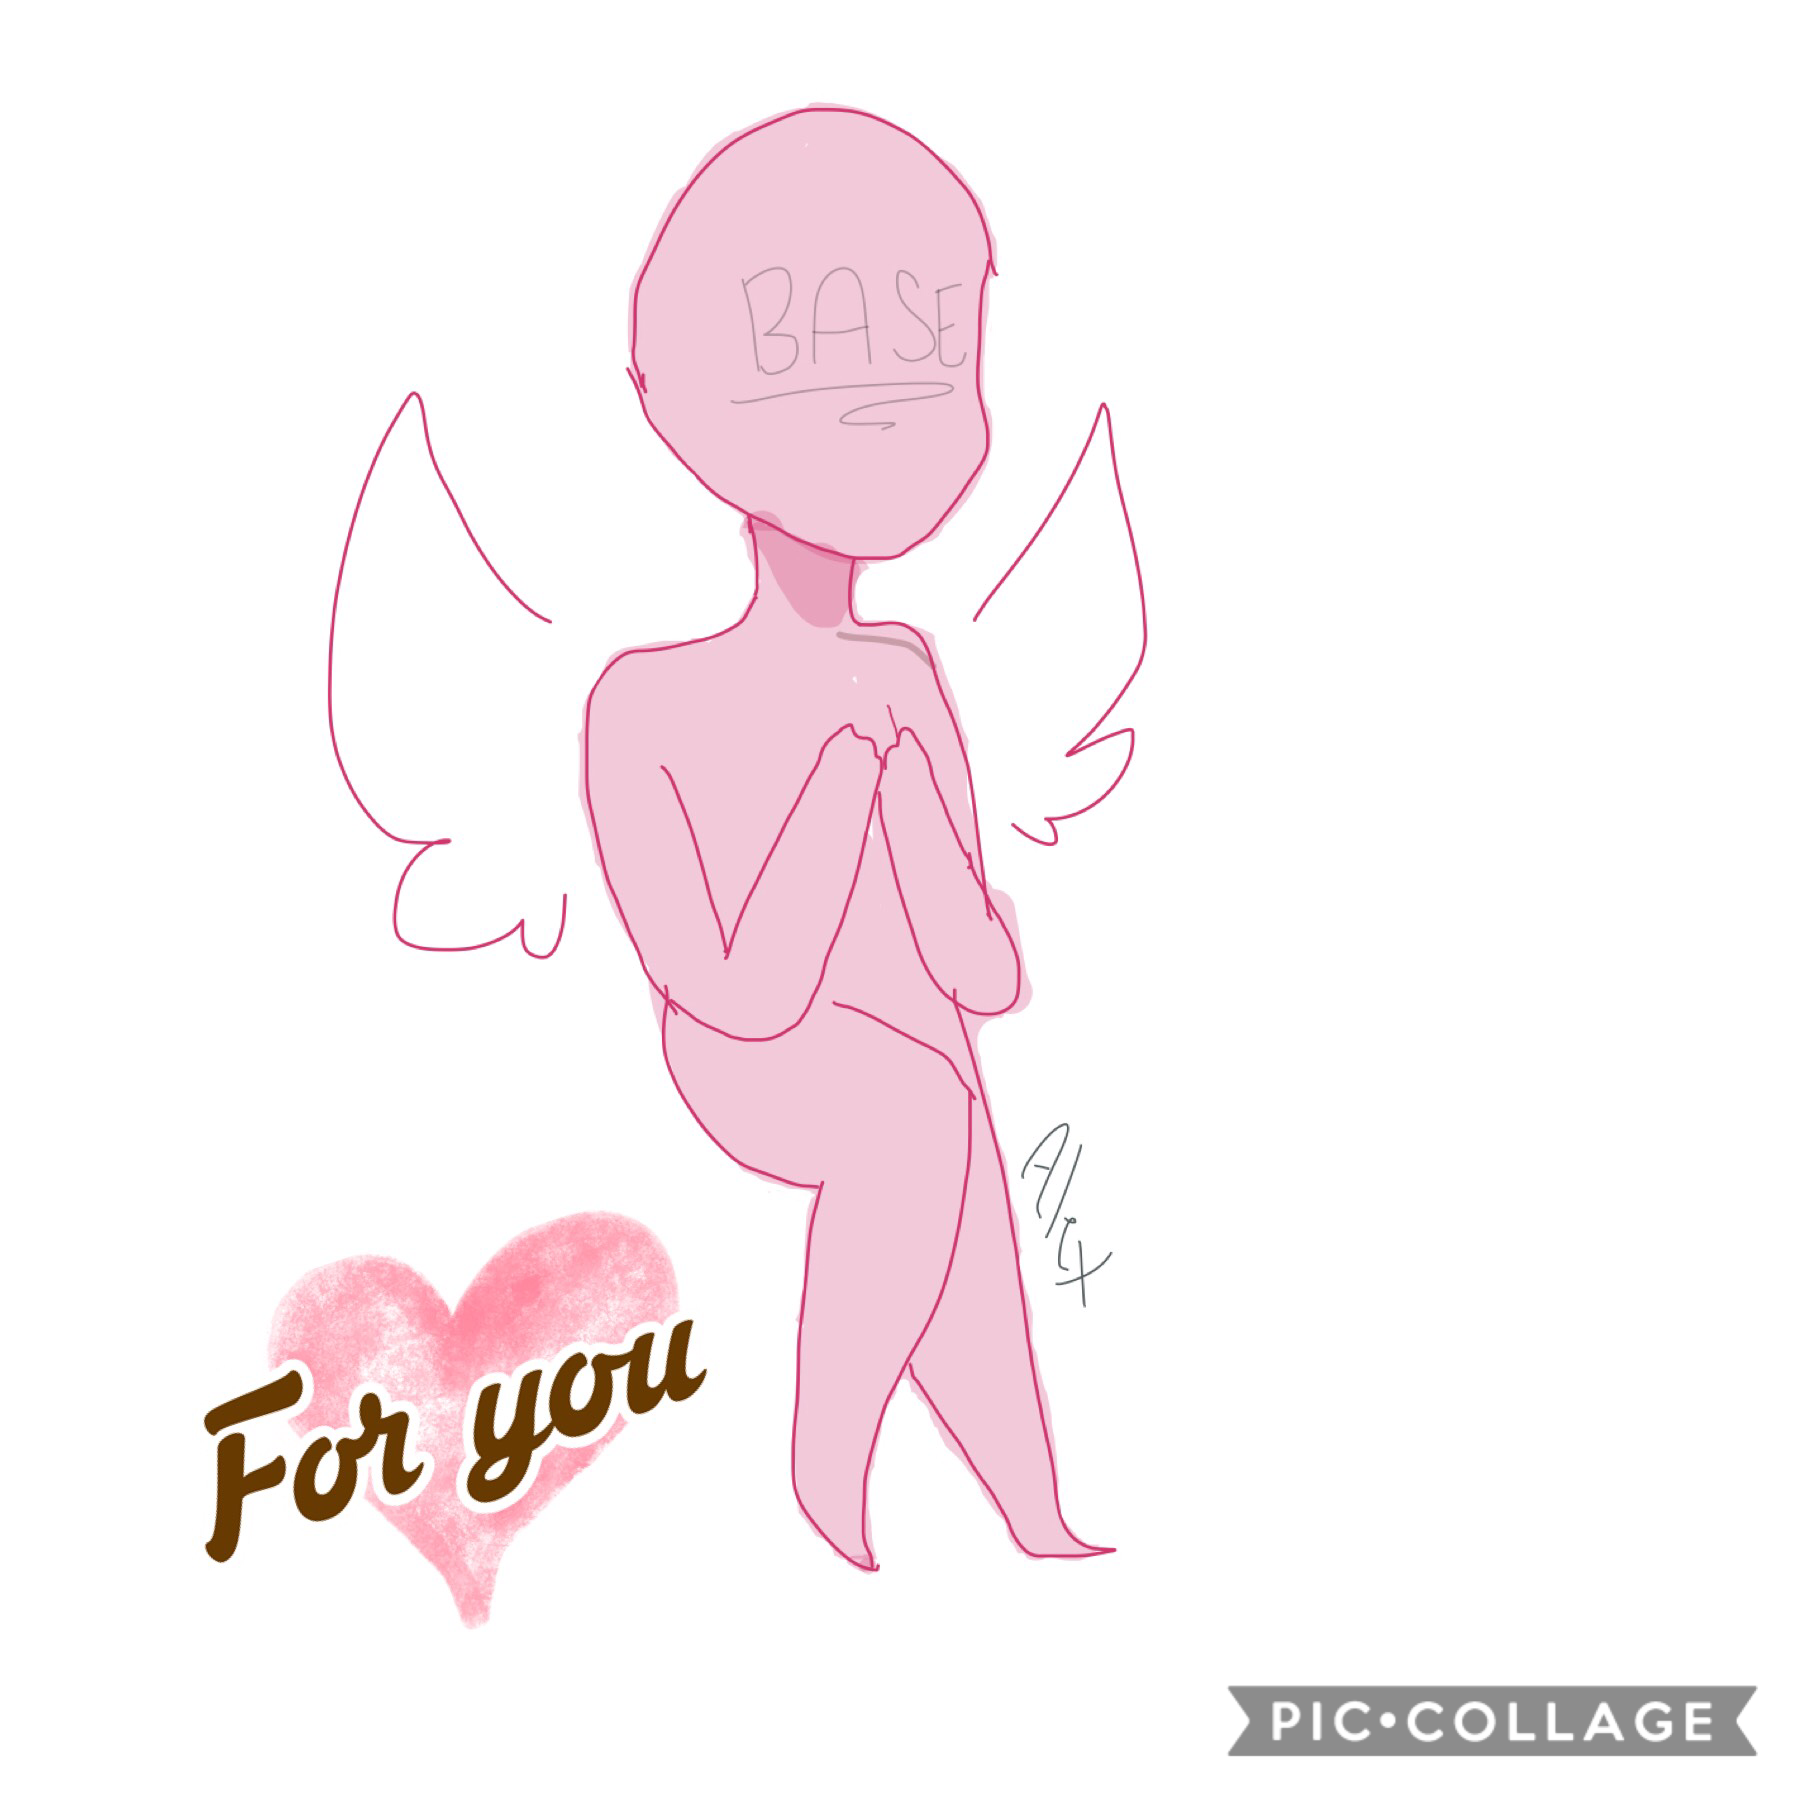 Happy Valentines Day! I made a base for everyone to use! Plz let me know if u used it and credit me plz